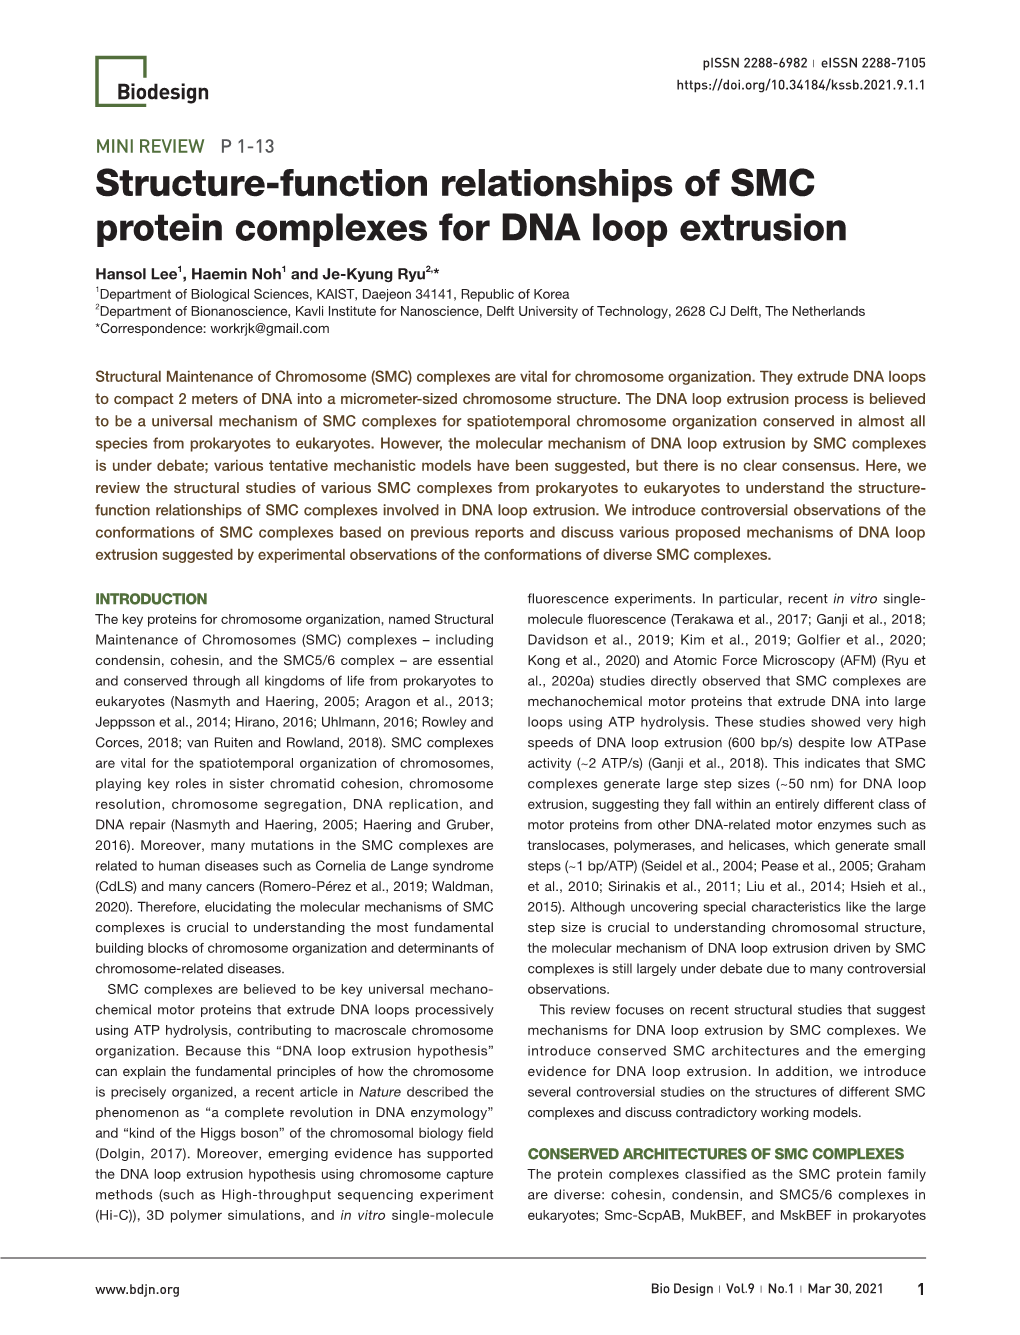 Structure-Function Relationships of SMC Protein Complexes for DNA Loop Extrusion